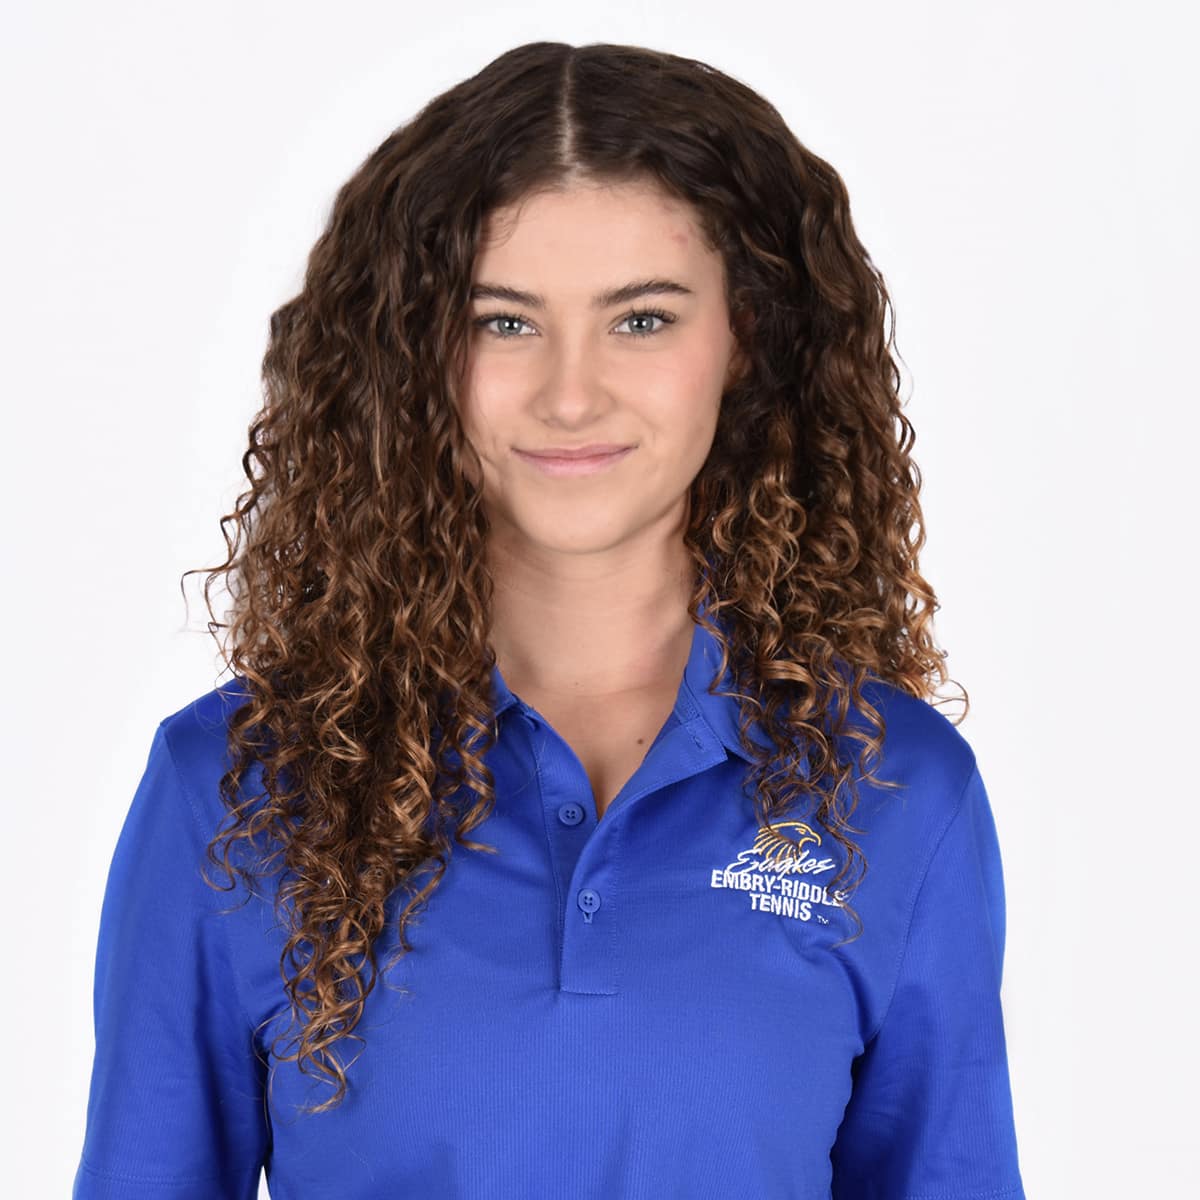 Julia Mautner, here in an Embry-Riddle Women’s Tennis shirt, is now a volunteer assistant coach with the team.